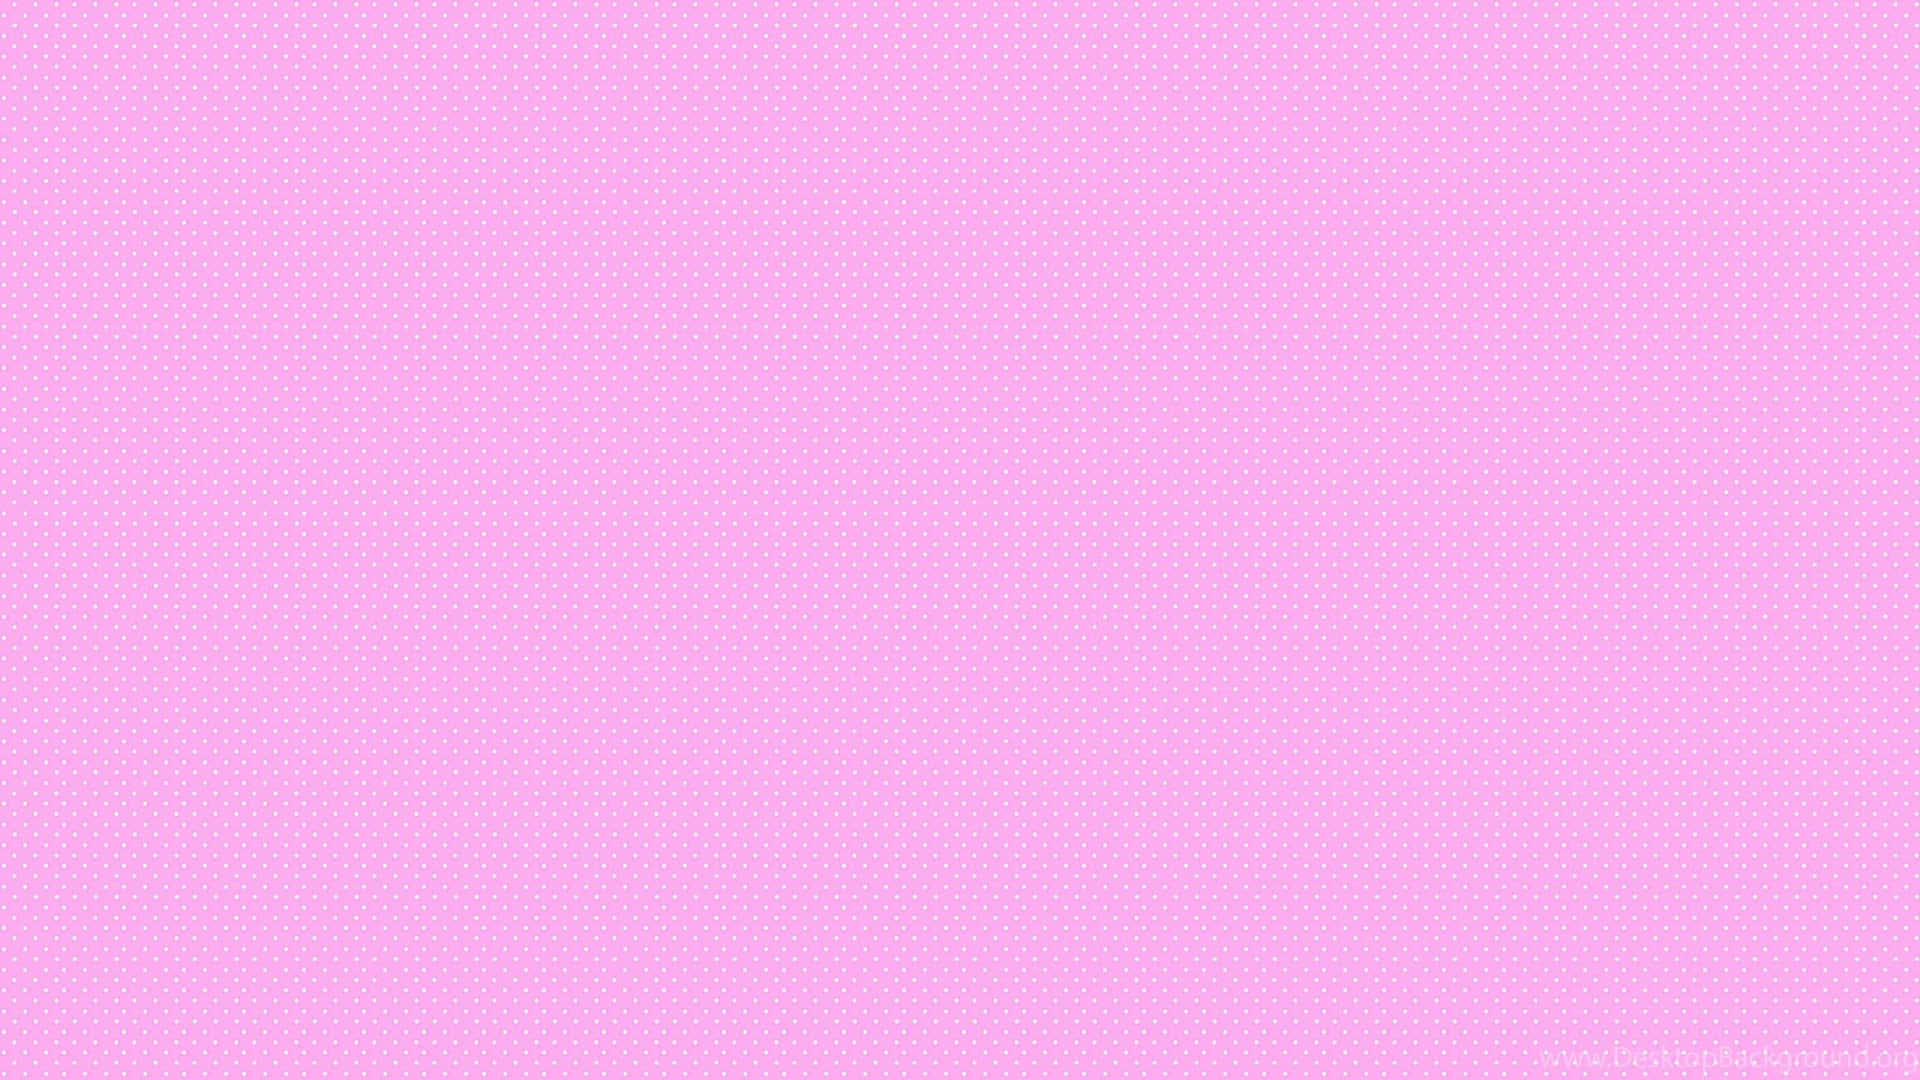 Download A pink solid color that creates an eye-catching look. Wallpaper |  